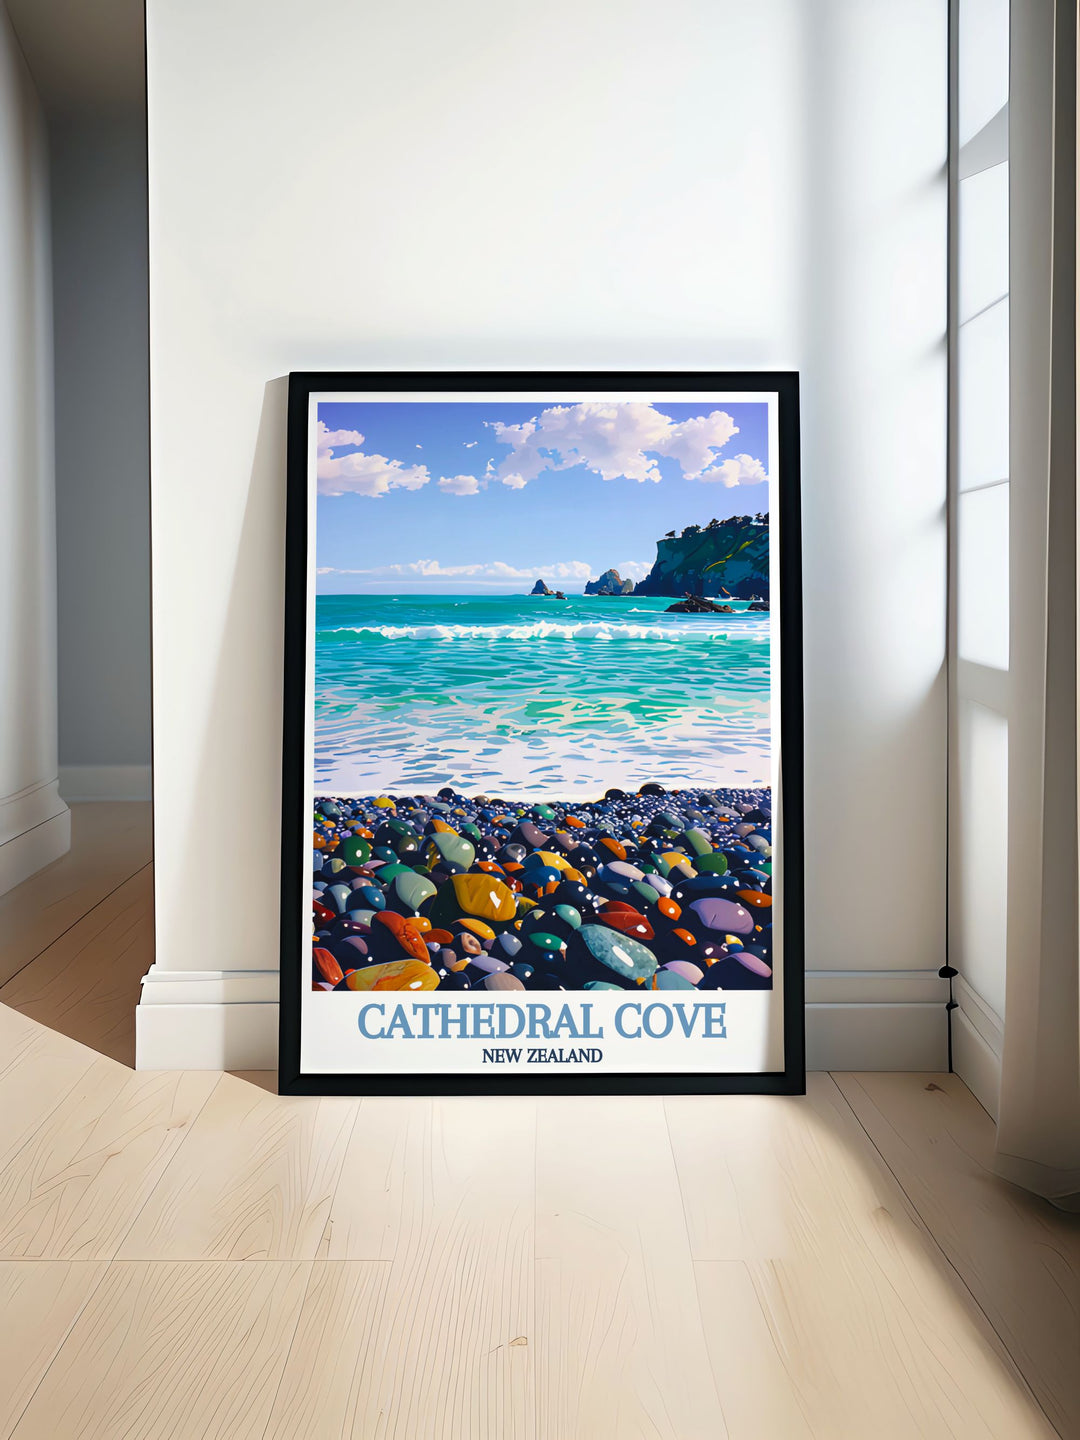 A serene beach scene at Cathedral Cove, where the gentle waves meet the golden sands in a tranquil embrace.